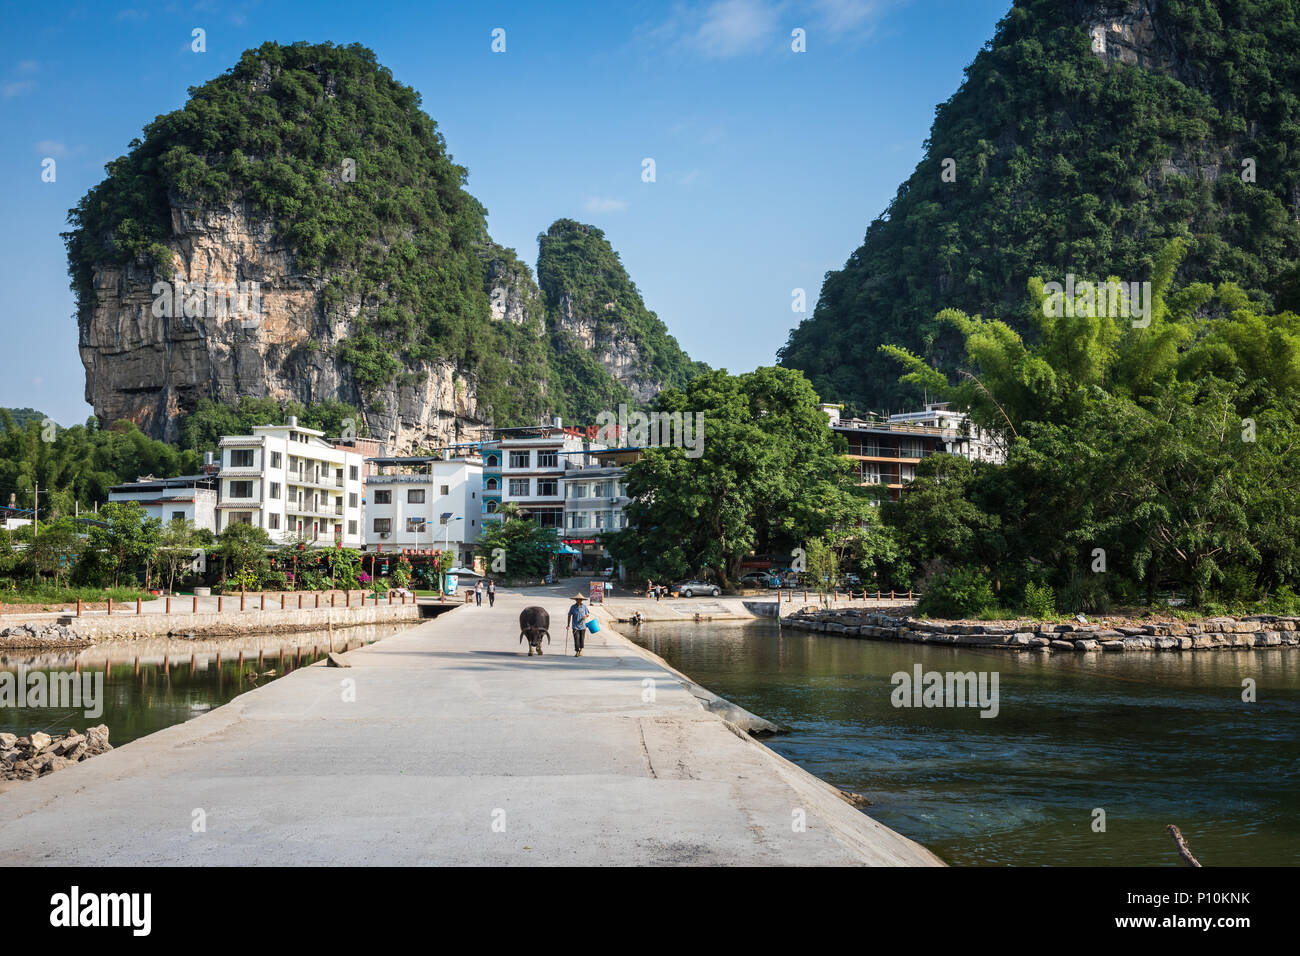 Scenic summer sunny landscape at Yangshuo County of Guilin, China. View of beautiful karst mountains Amazing green hills on blue sky background. Stock Photo